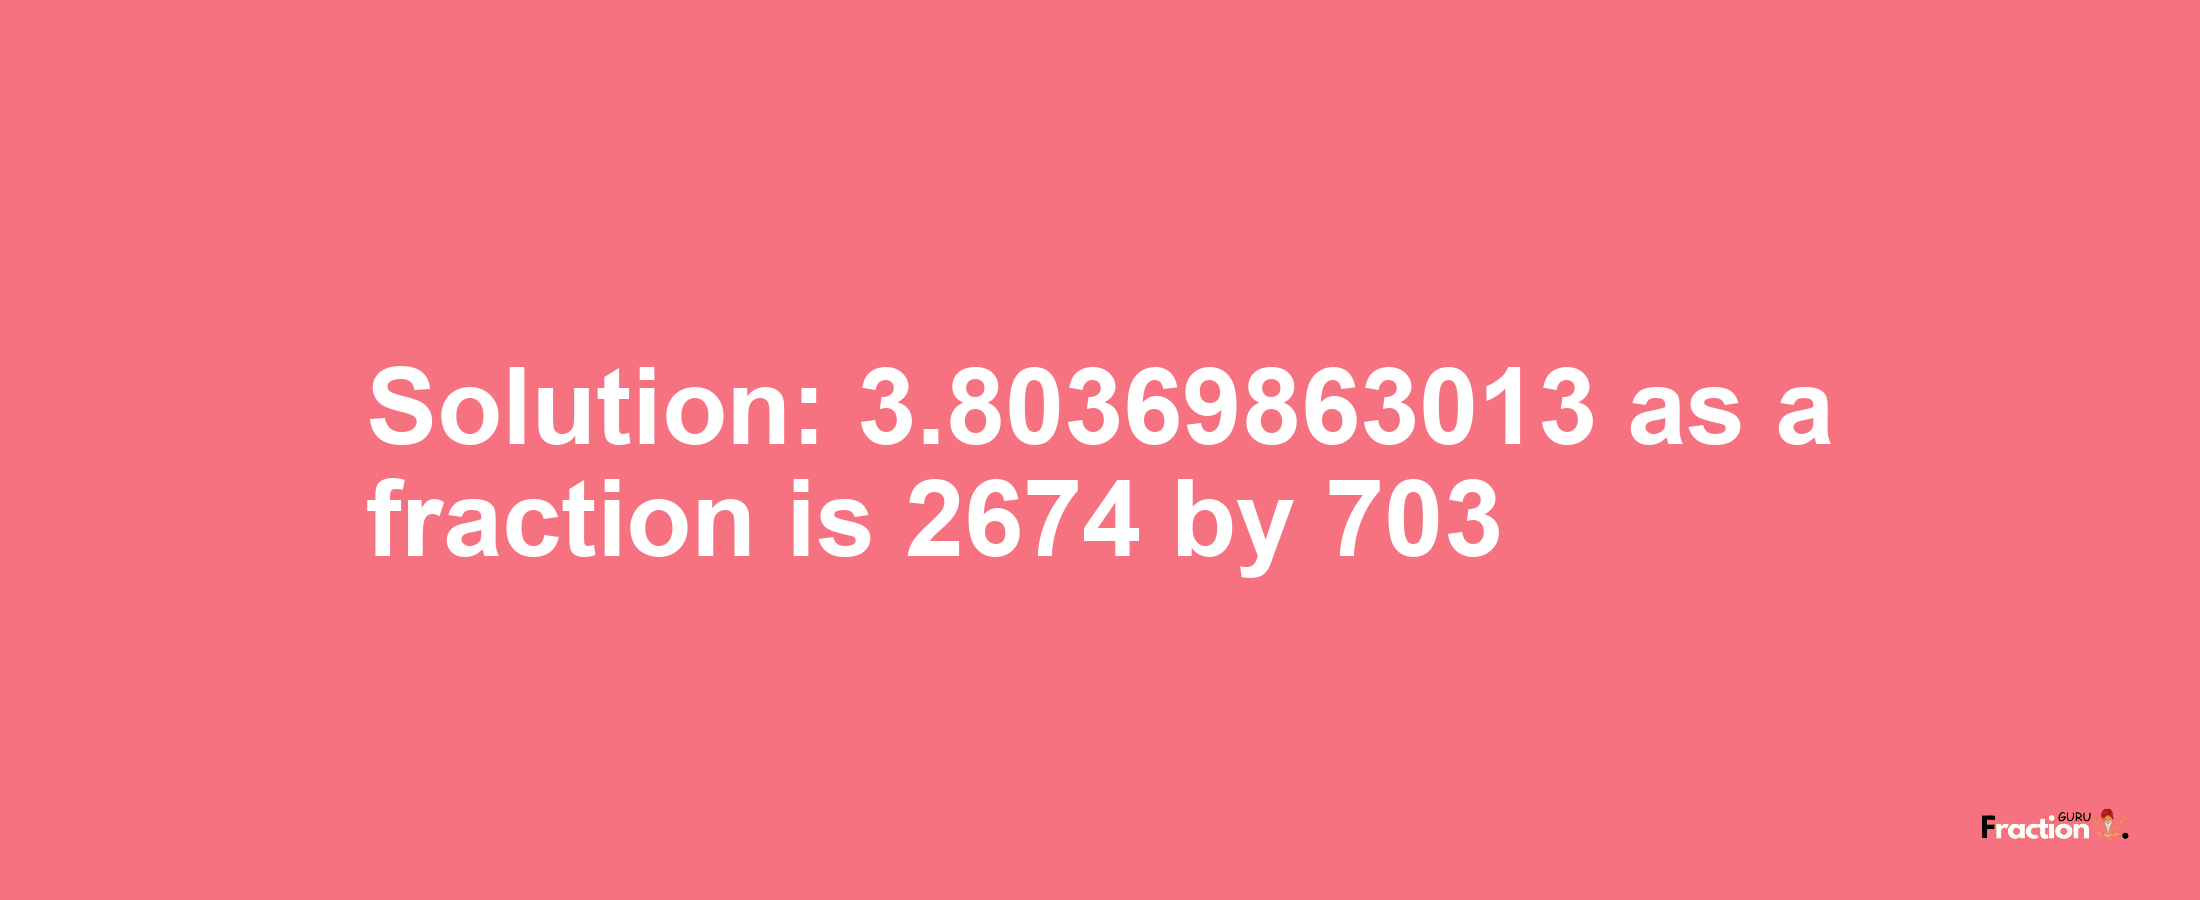 Solution:3.80369863013 as a fraction is 2674/703